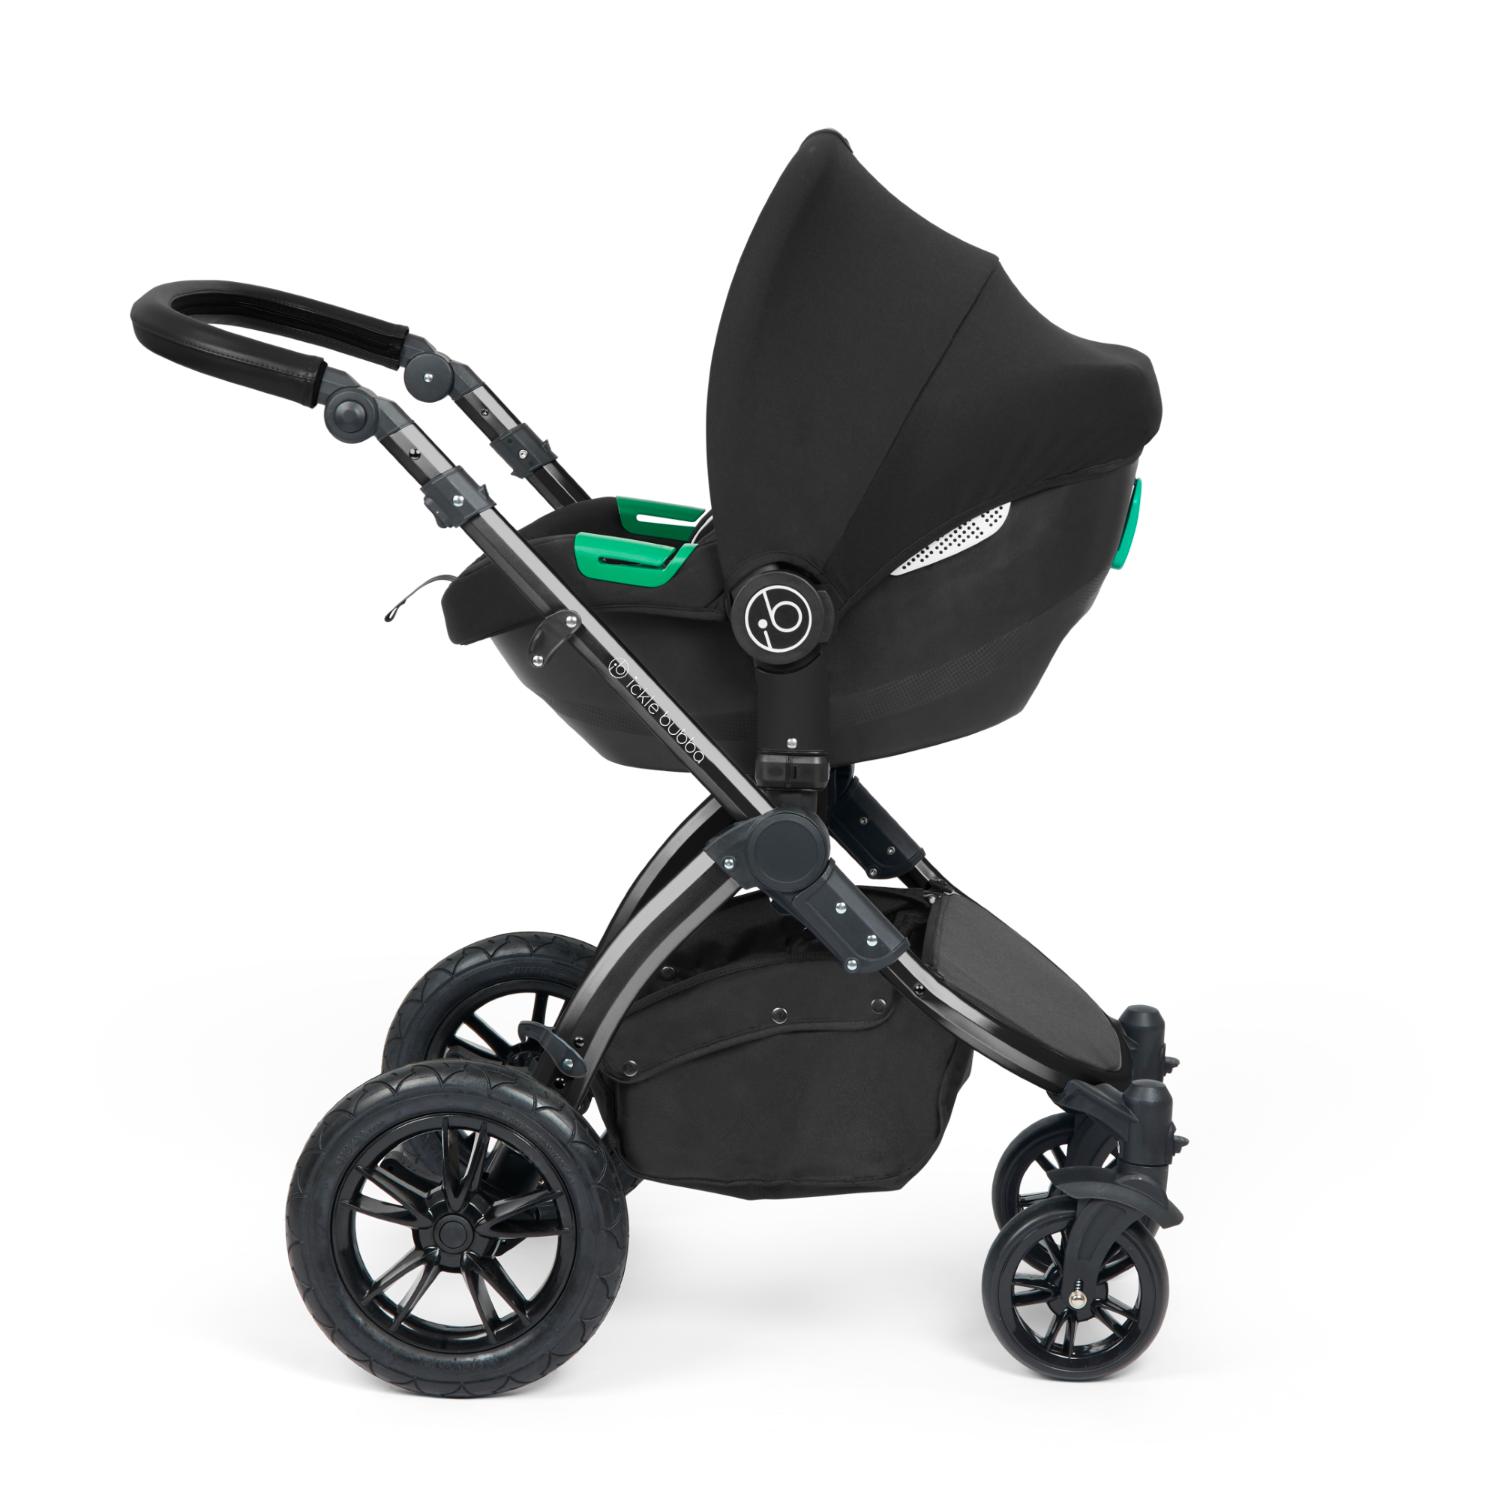 Ickle Bubba Stomp Luxe Pushchair with Cirrus i-Size car seat attached in Woodland green colour